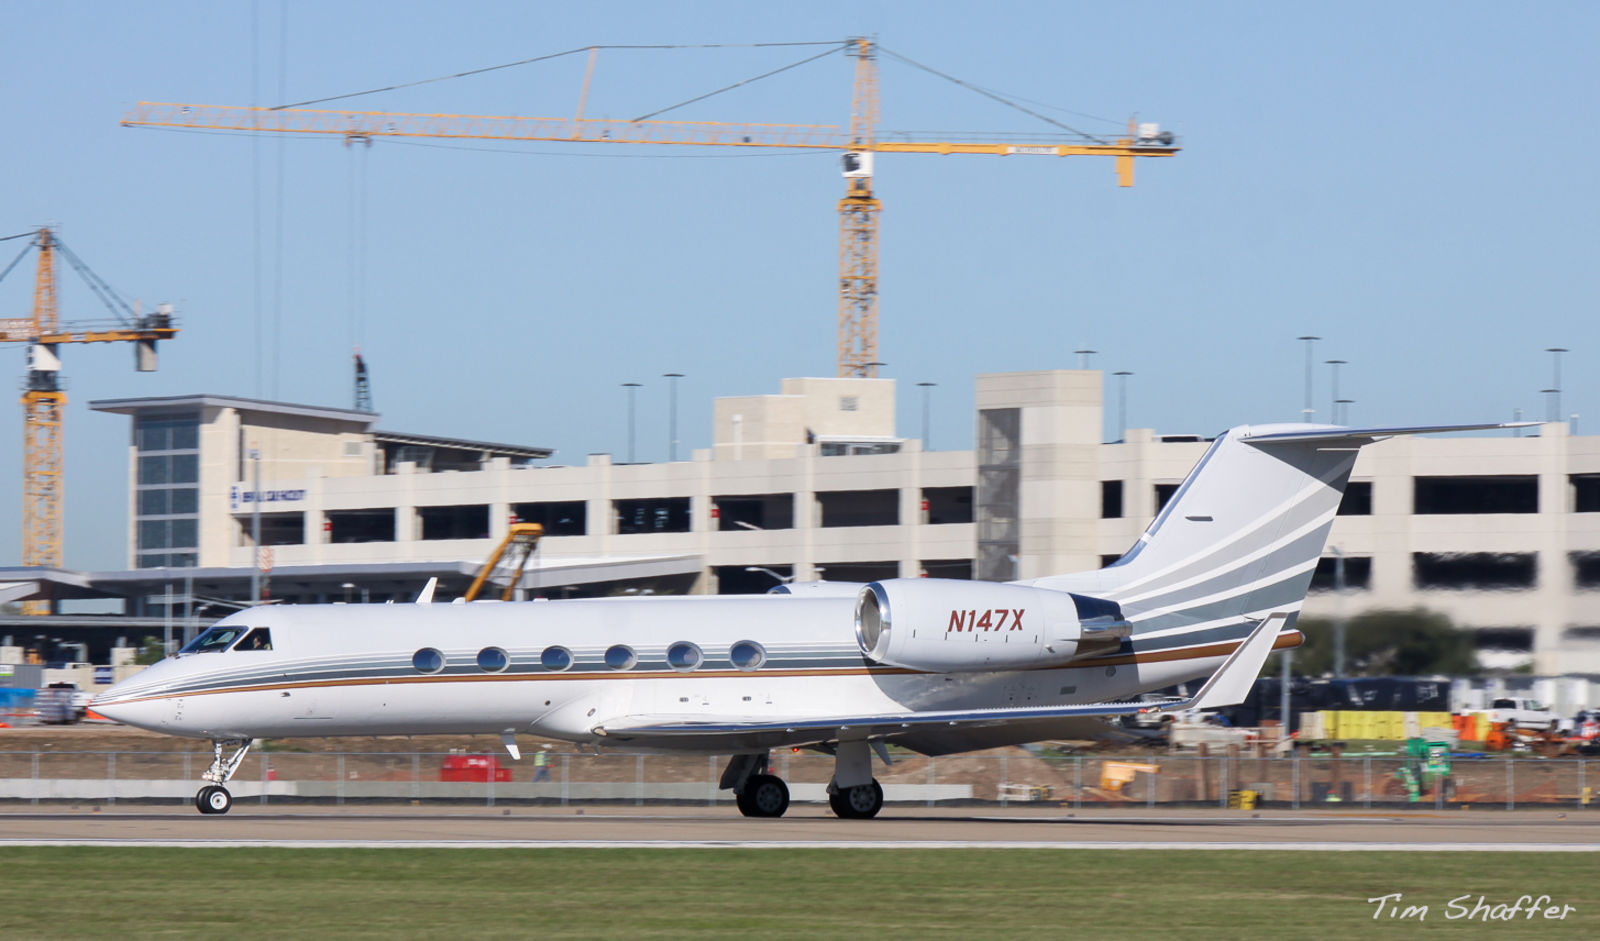 A Gulfstream IV at  Austin Bergstrom International Airport. Note: this is not the accident aircraft. (Tim Shaffer)